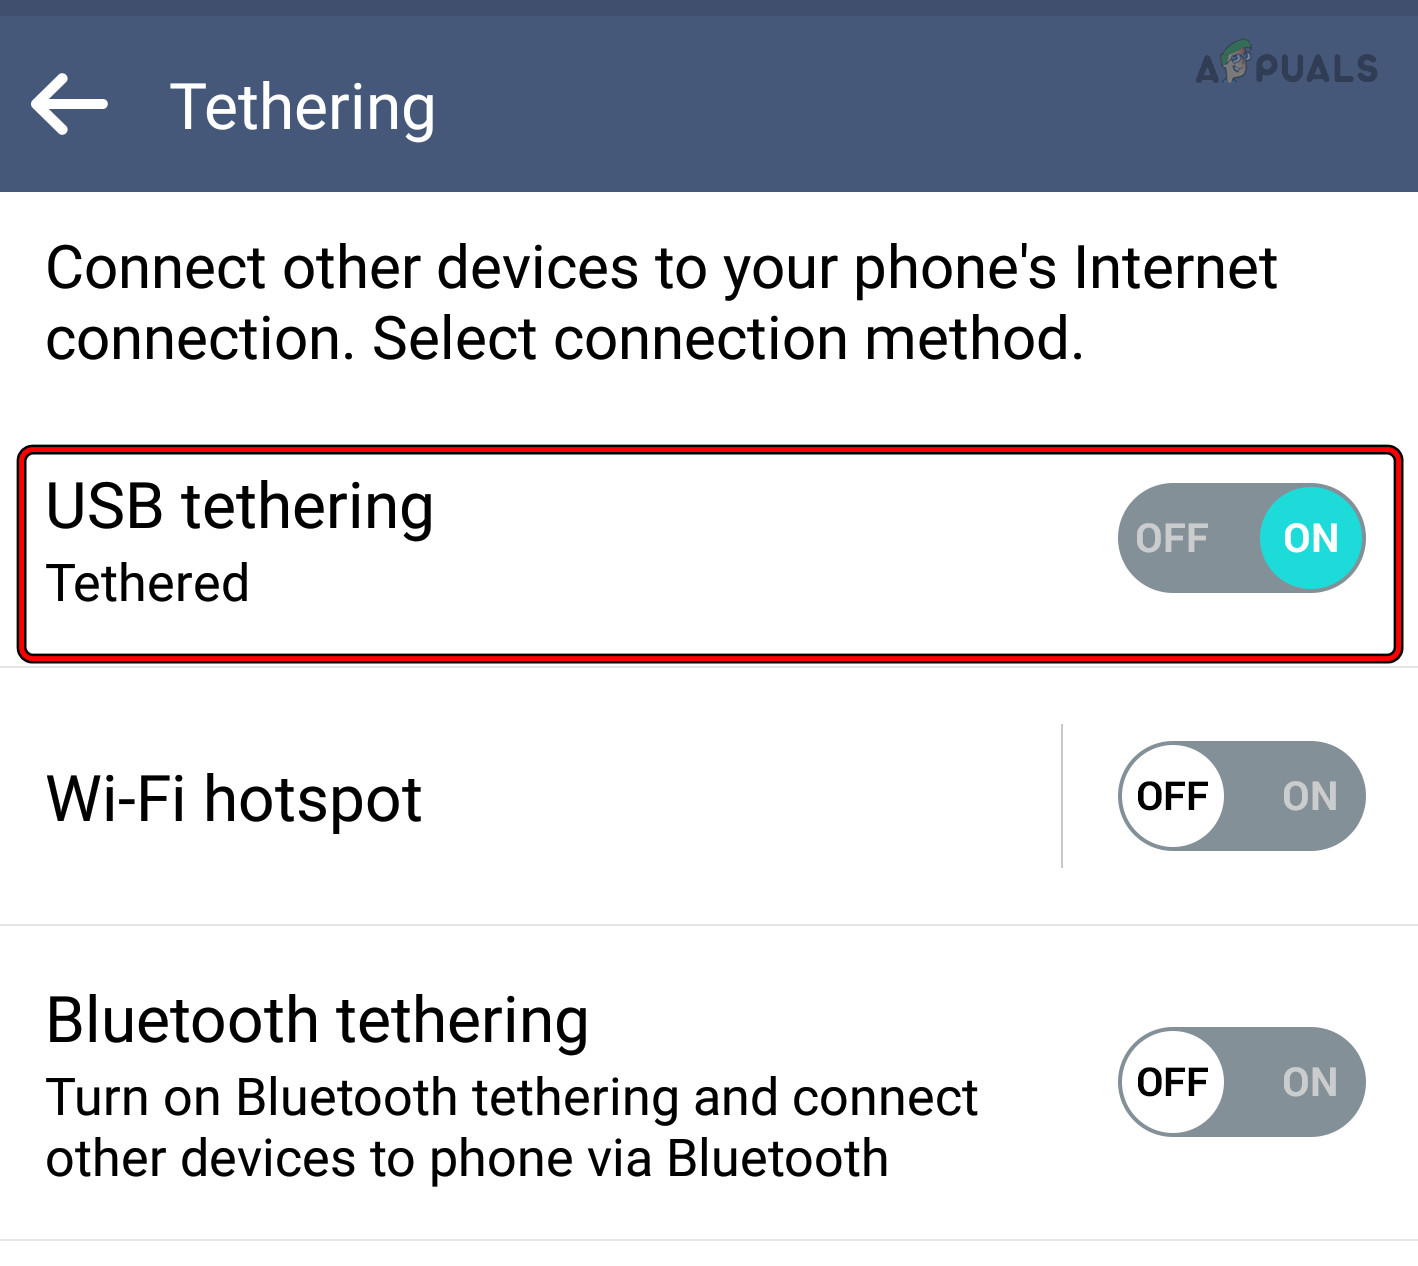 Enable USB Tethering on the Android Phone